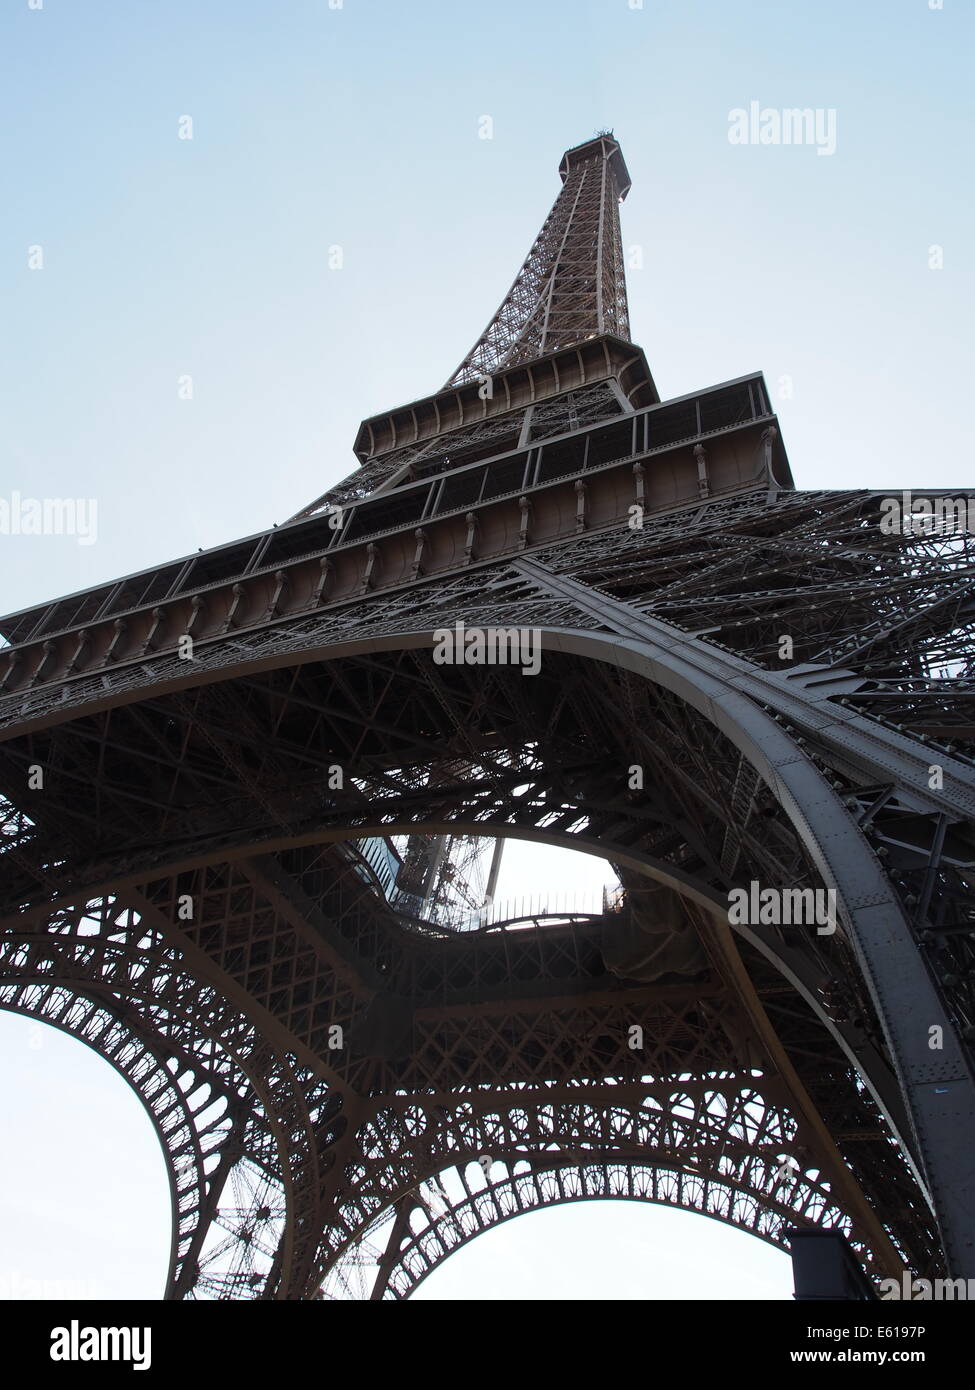 looking up to the top of the Eiffel Tower with blue sky in background Stock Photo